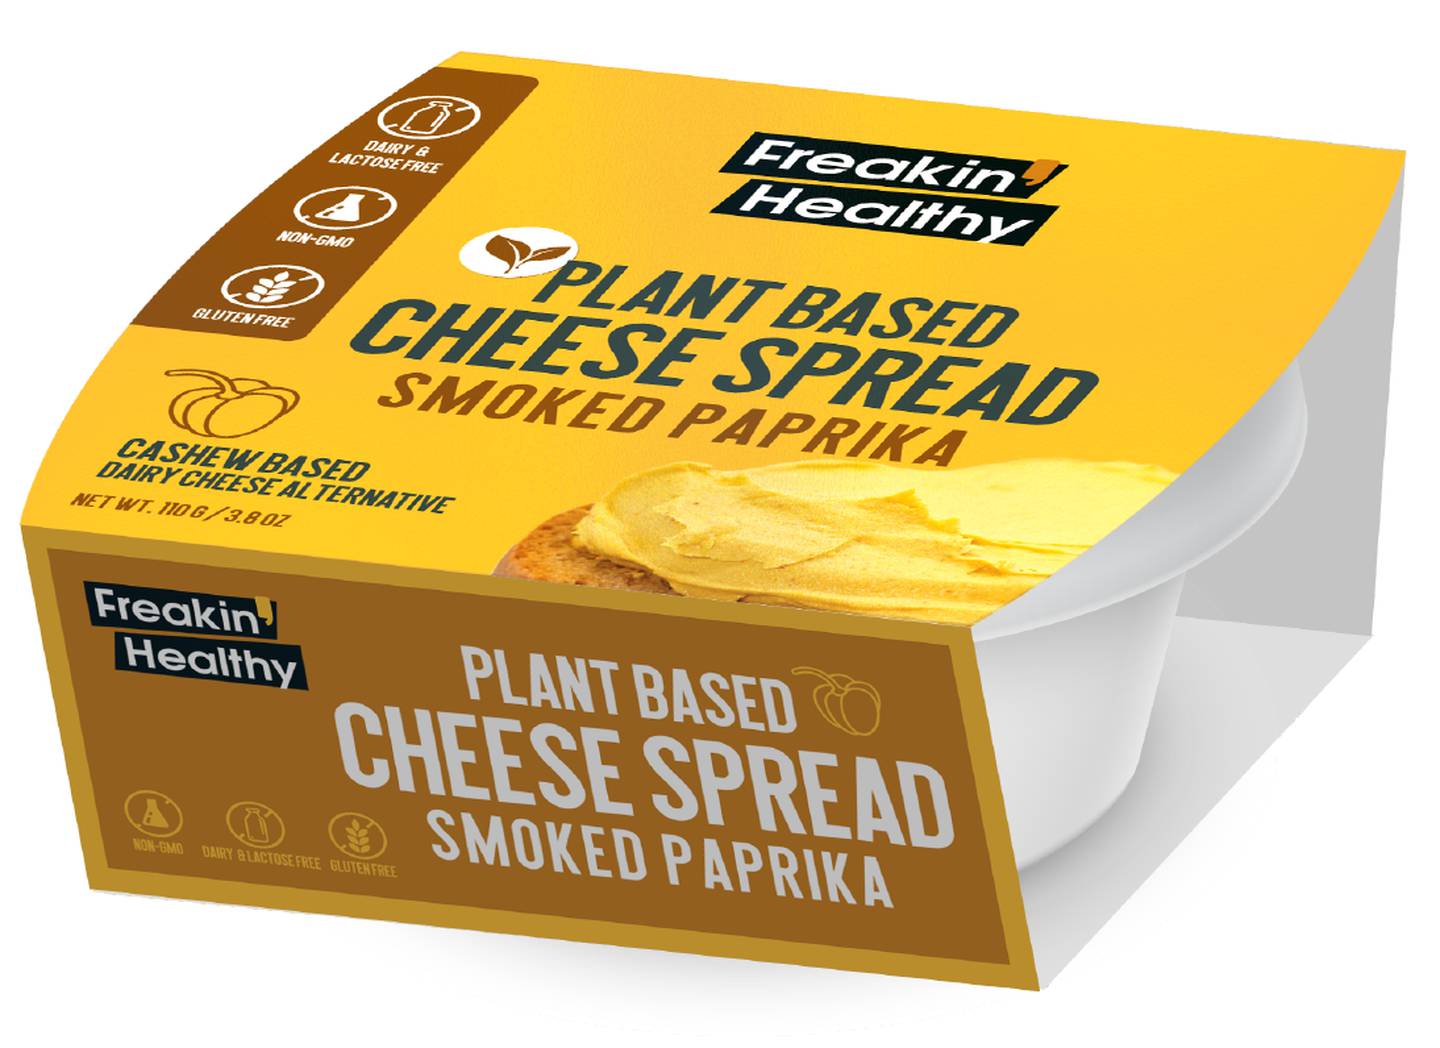 Freakin' Healthy is launching three flavours of plant-based cheese spread - Original, Chilli Spice and Smoked Paprika. Photo: Agthia